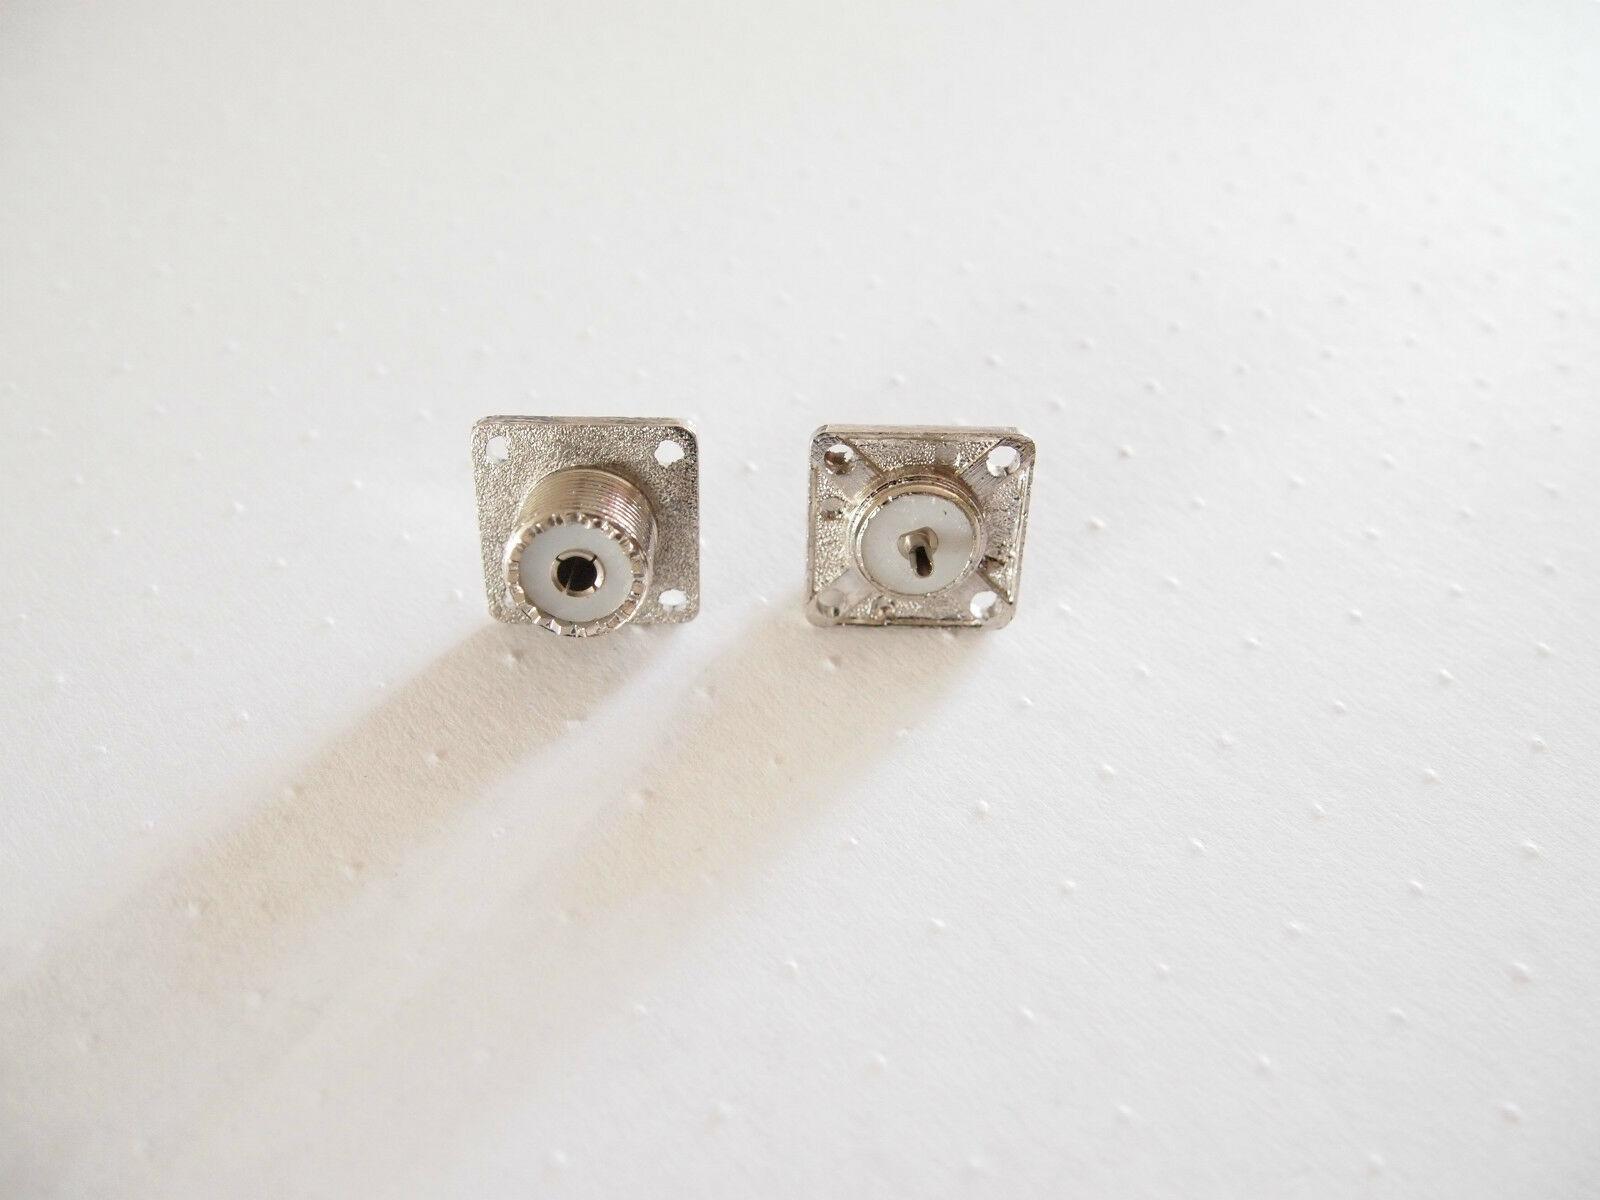 2 x UHF  SO239 Female 4 Hole Chassis Socket   RF Connector